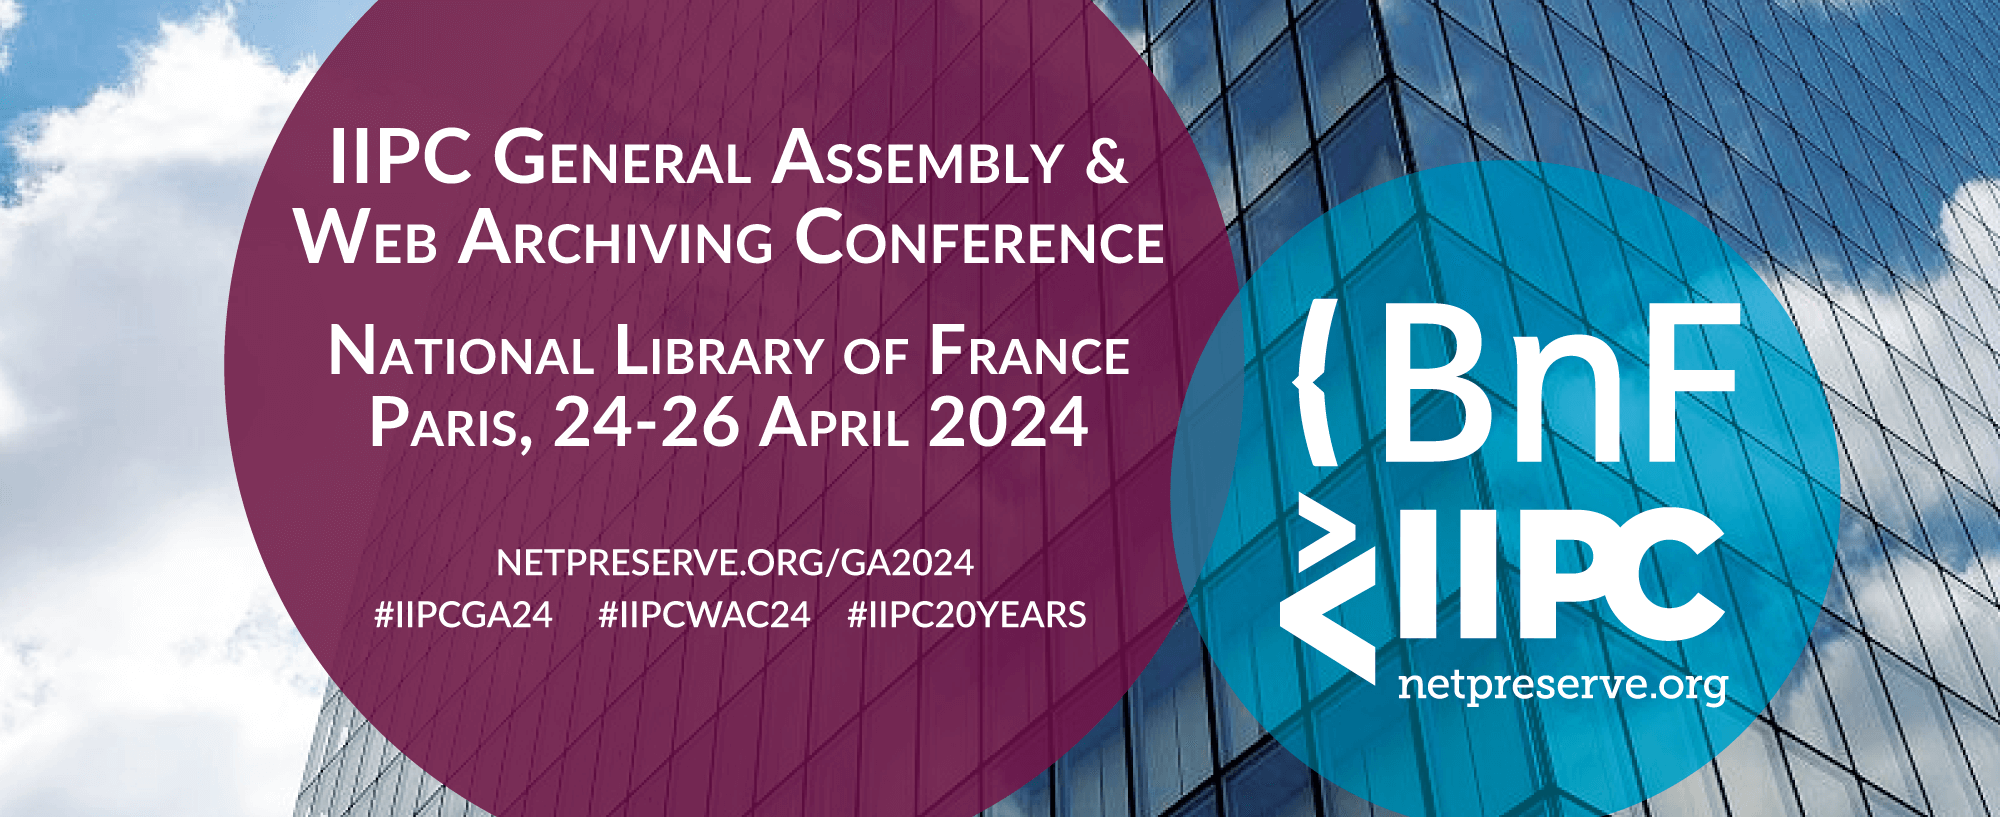 IIPC General Assembly & Web Archiving Conference. National Library of France, Paris 24-26 April 2024